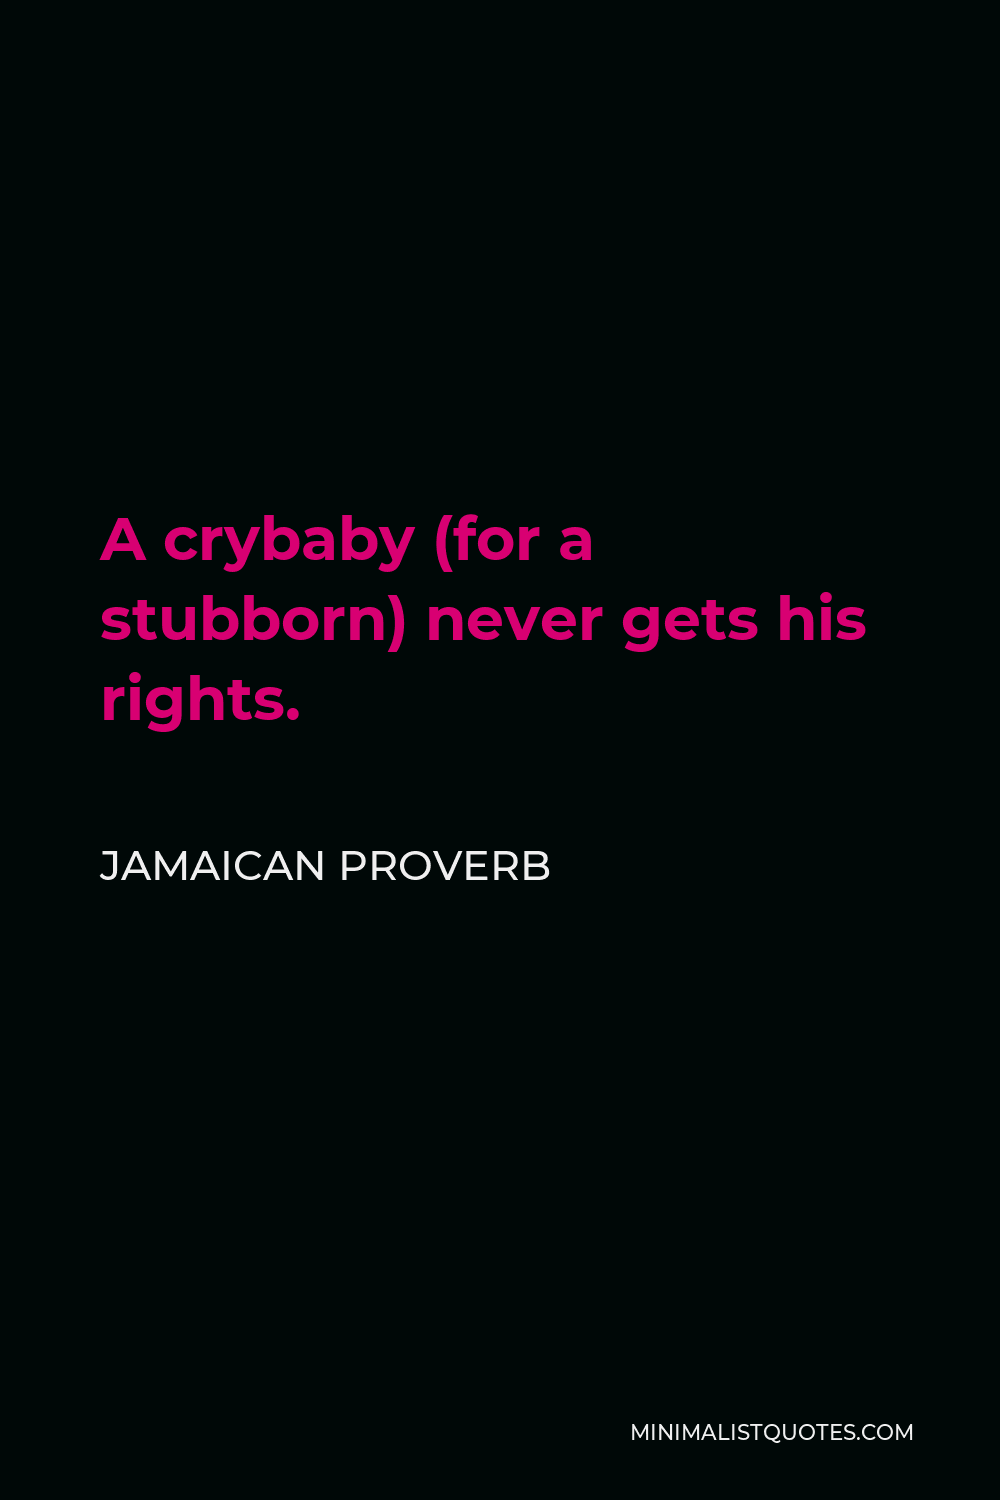 Jamaican Proverb Quote - A crybaby (for a stubborn) never gets his rights.